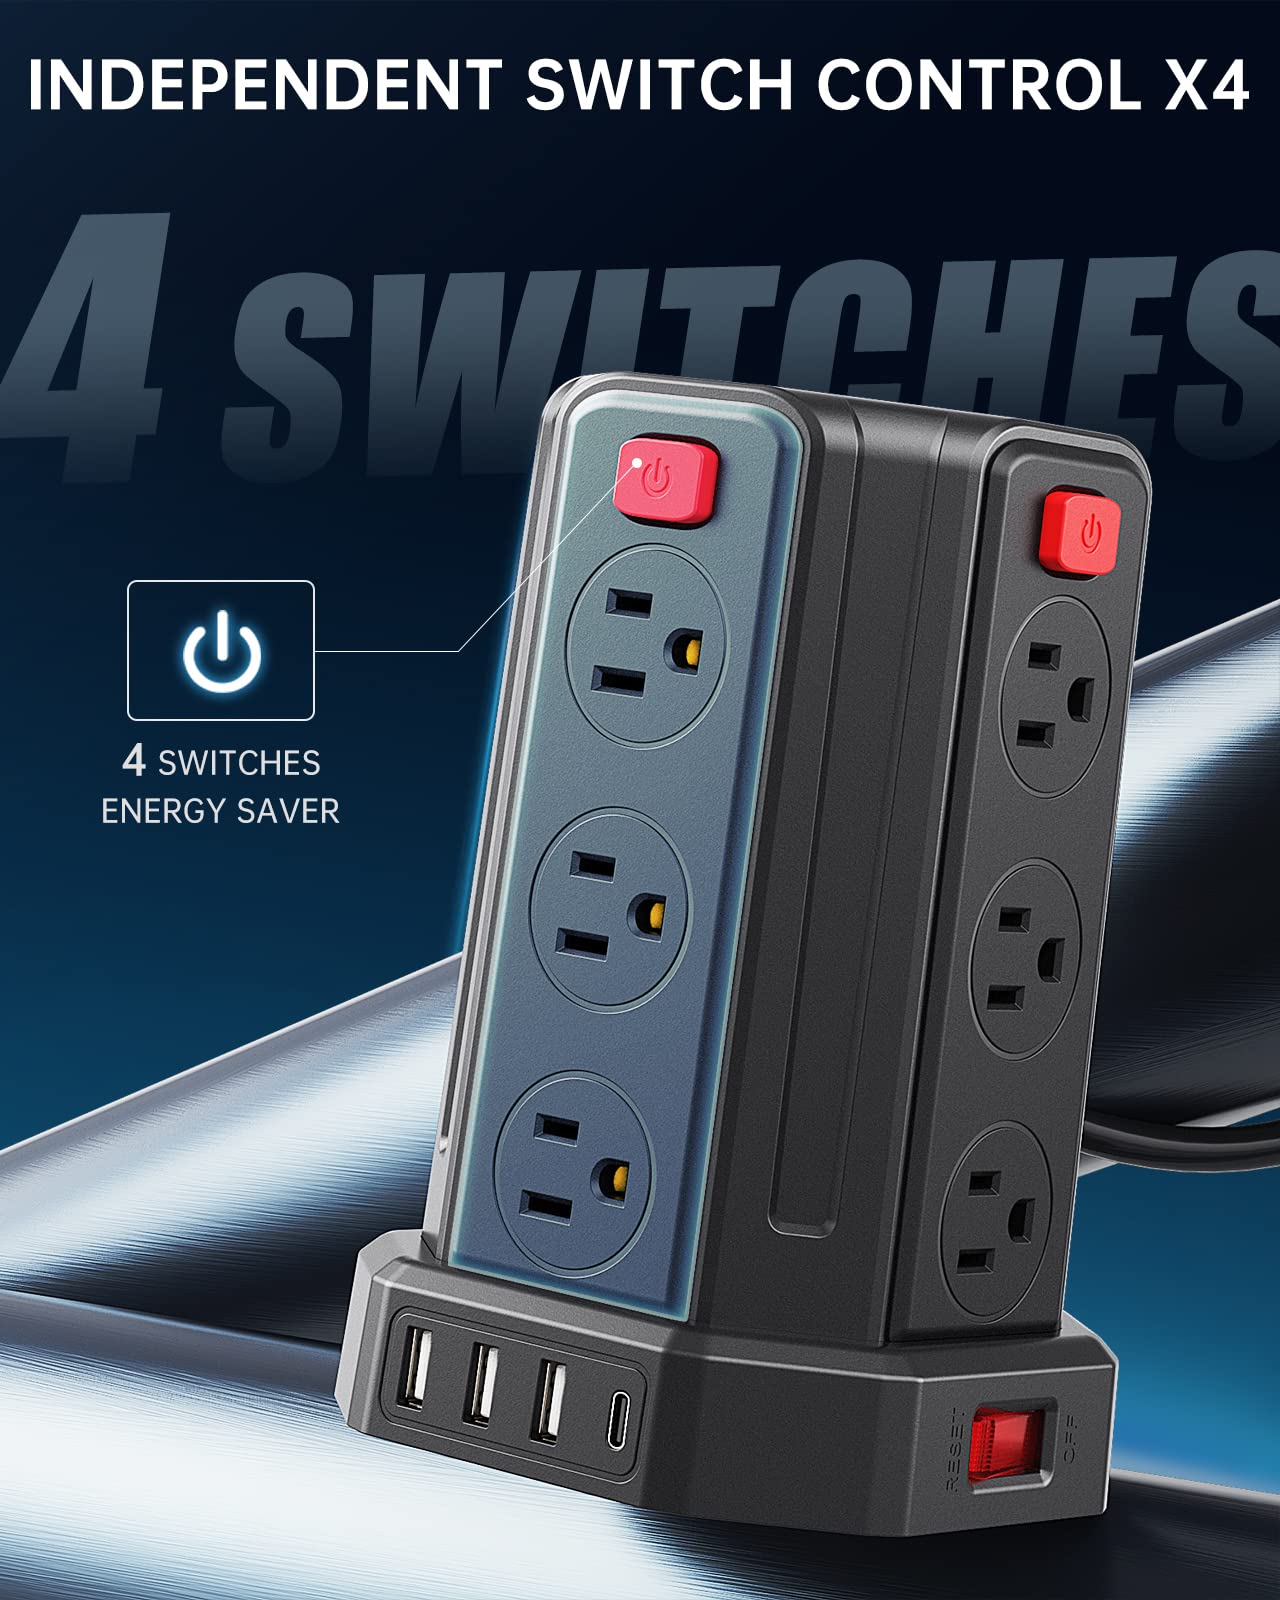 ZYC05 Power Strip Surge Protector Only $20.99 At Amazon prime day!